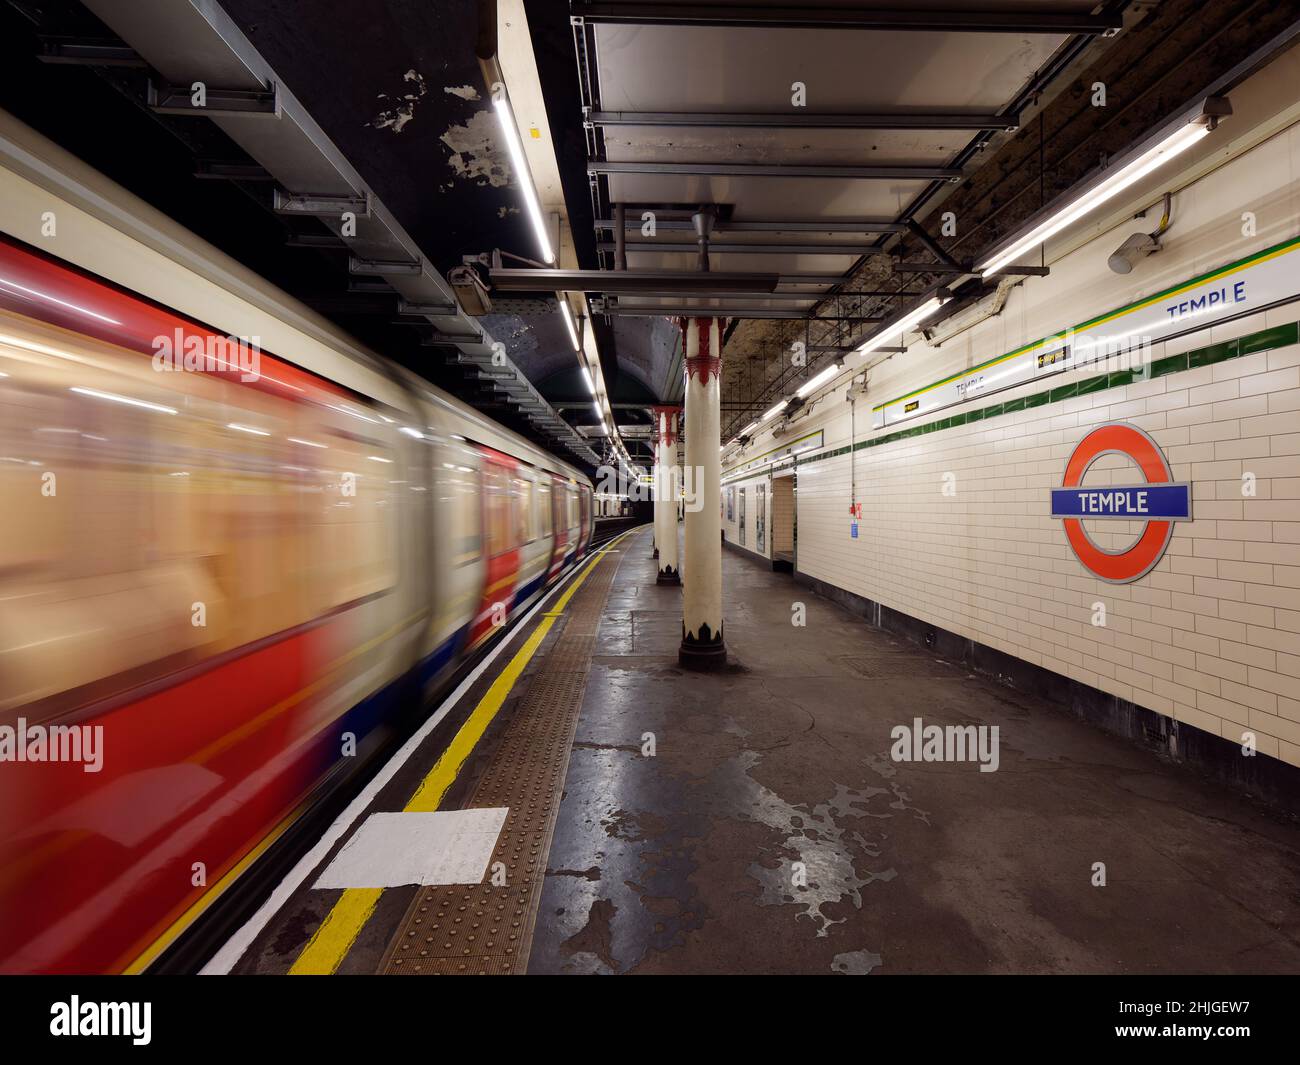 London, Greater London, England, January 5th 2022: Interior of Temple underground aka tube station as a train passes a platform with motion blur. Stock Photo